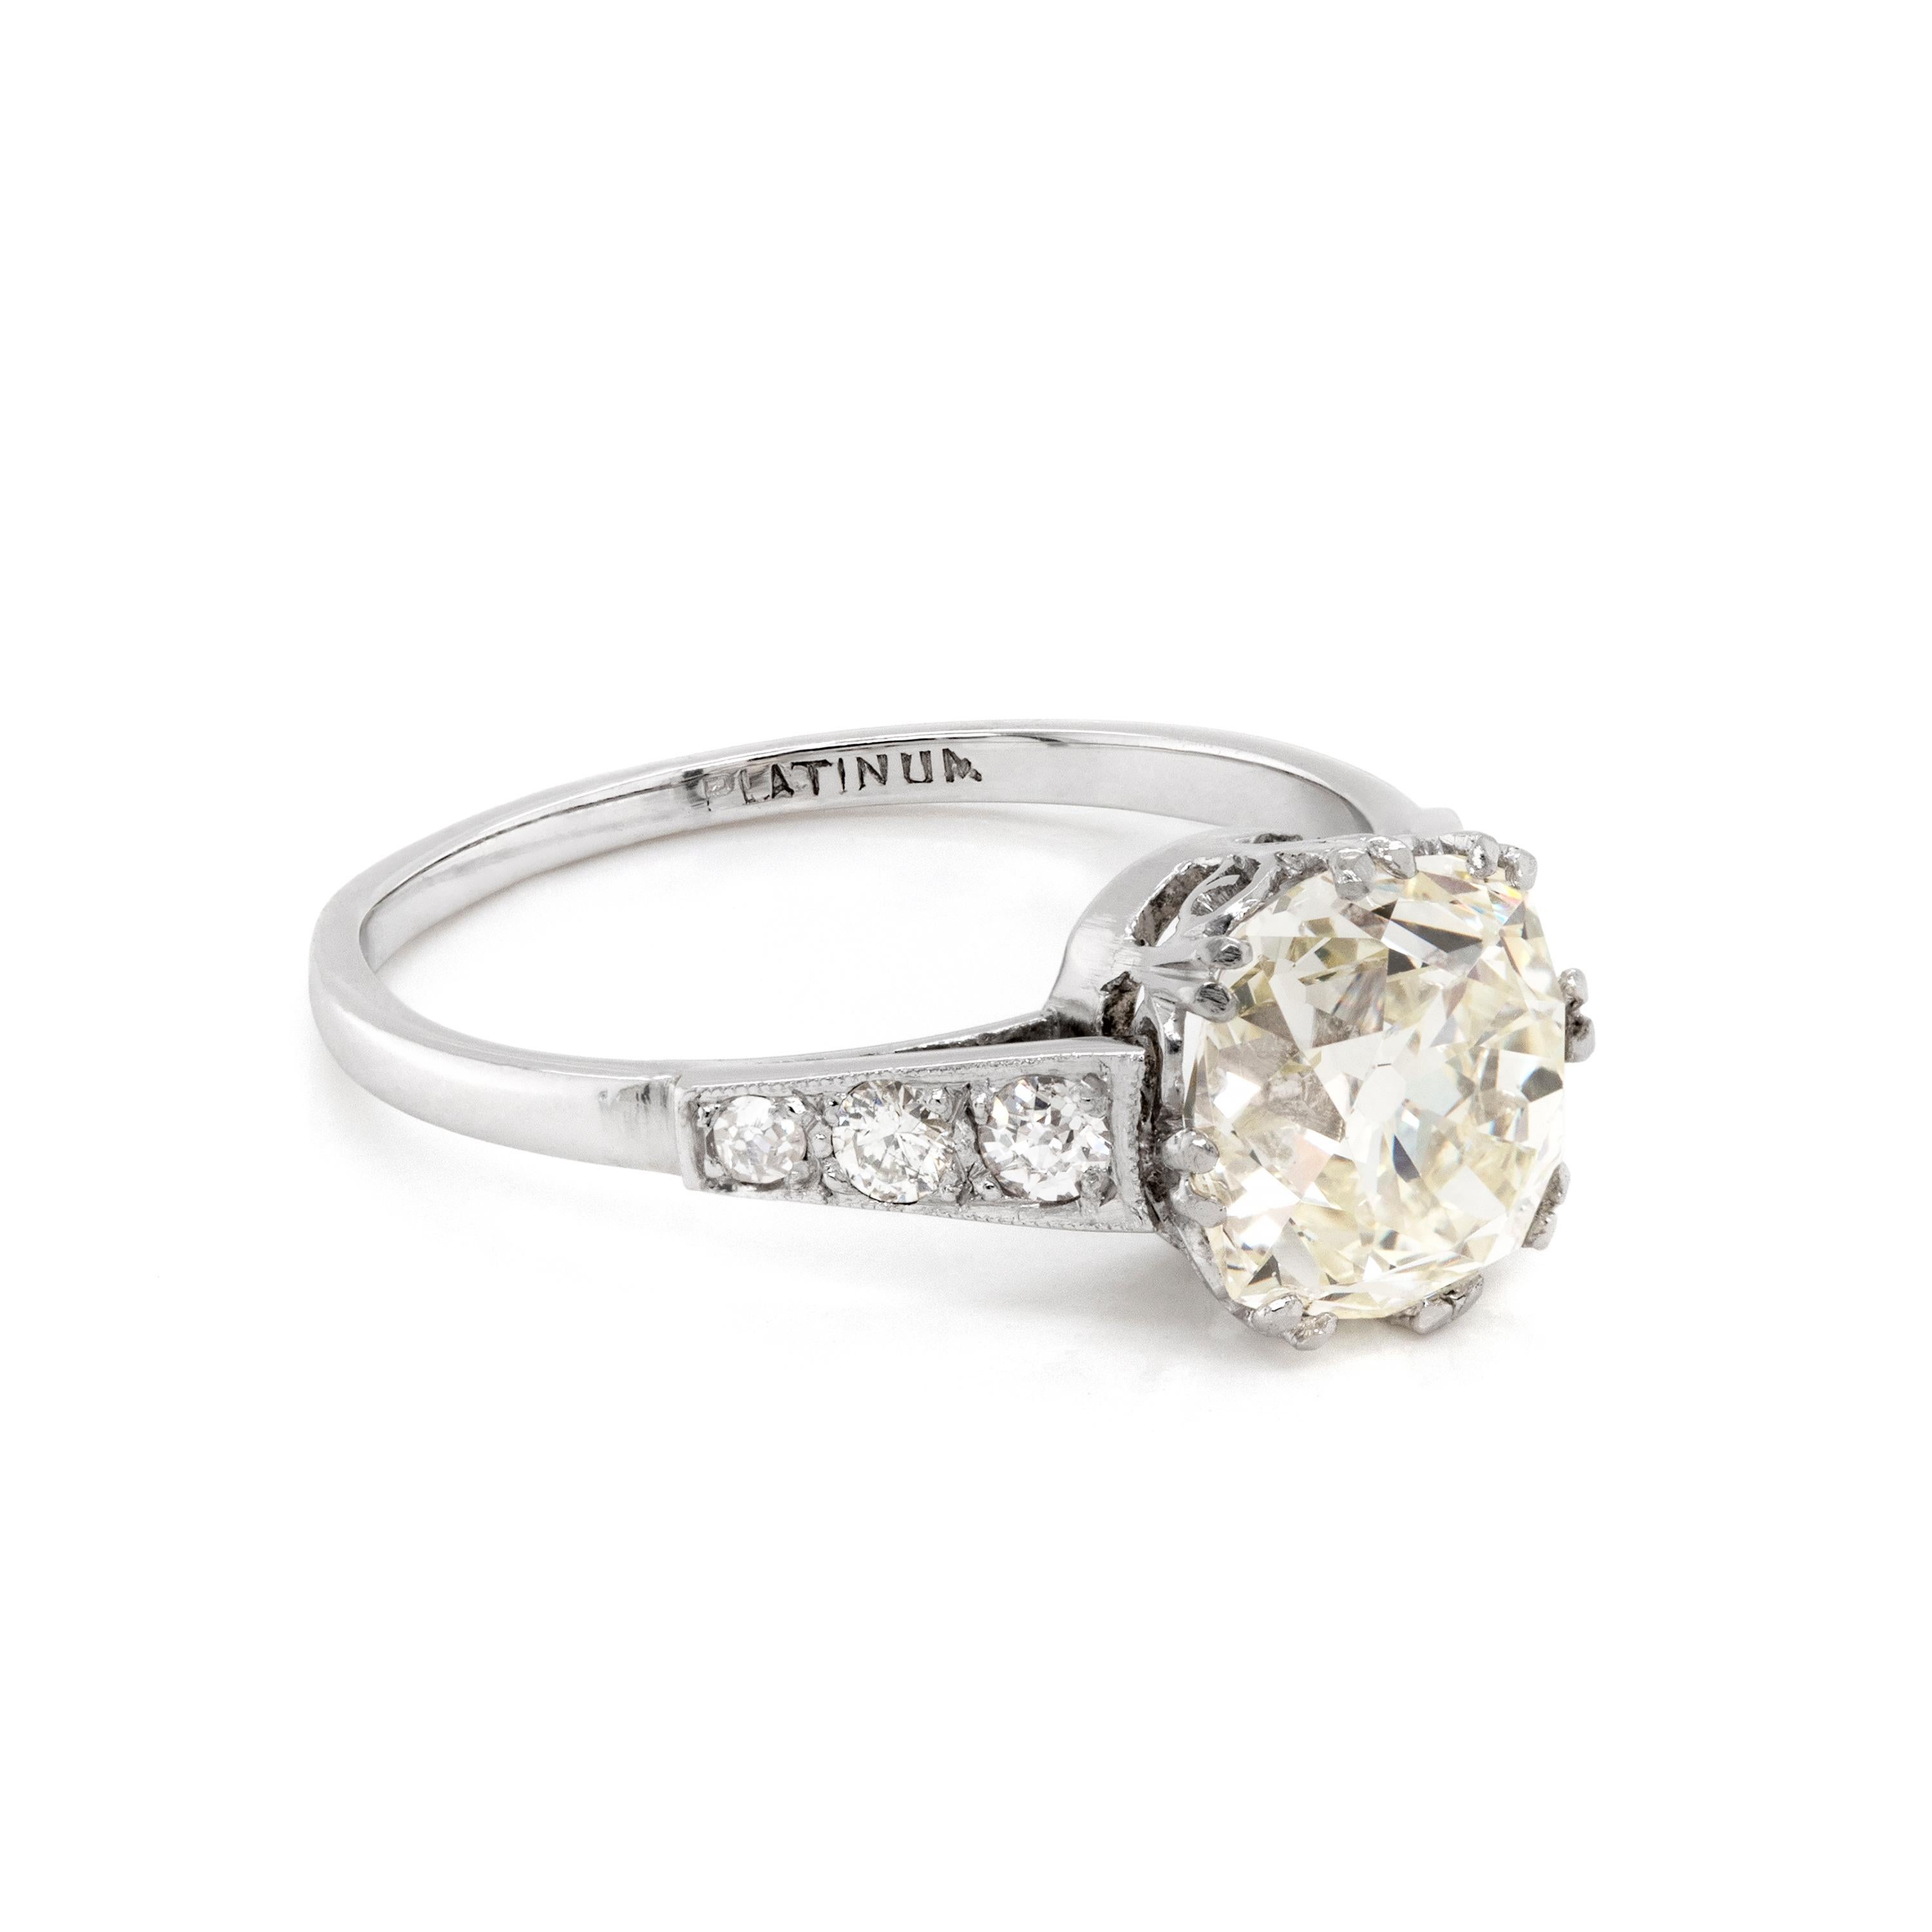 This original antique engagement ring features a beautiful old mine cushion cut diamond weighing 2.26ct set in an eight split claw, open back setting. The stone is wonderfully accompanied by three old cut diamonds on either shoulder, weighing an